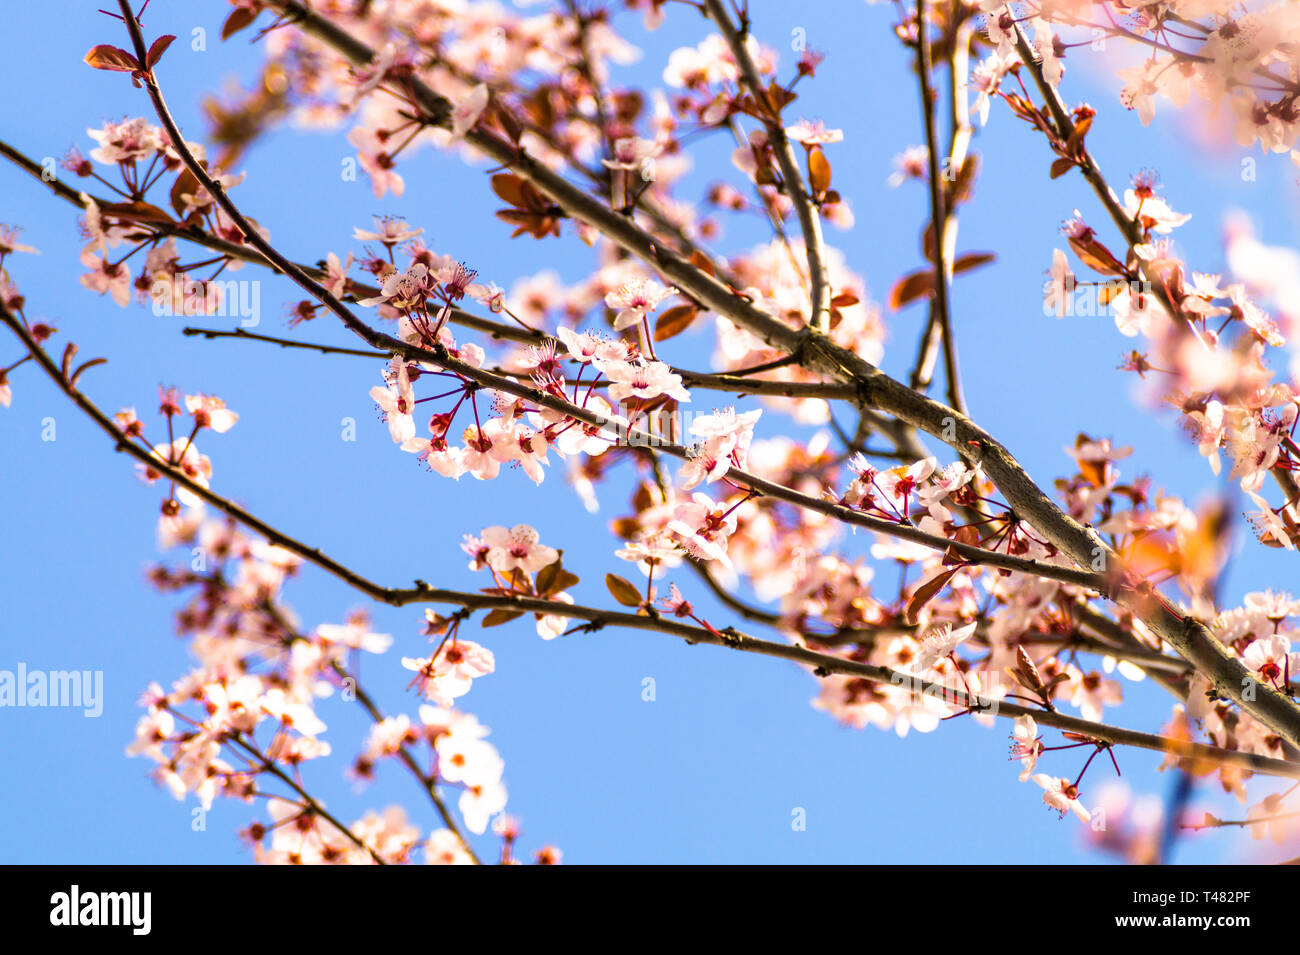 A beautiful blooming tree with white flowers. Nice spring time flowers background. Stock Photo